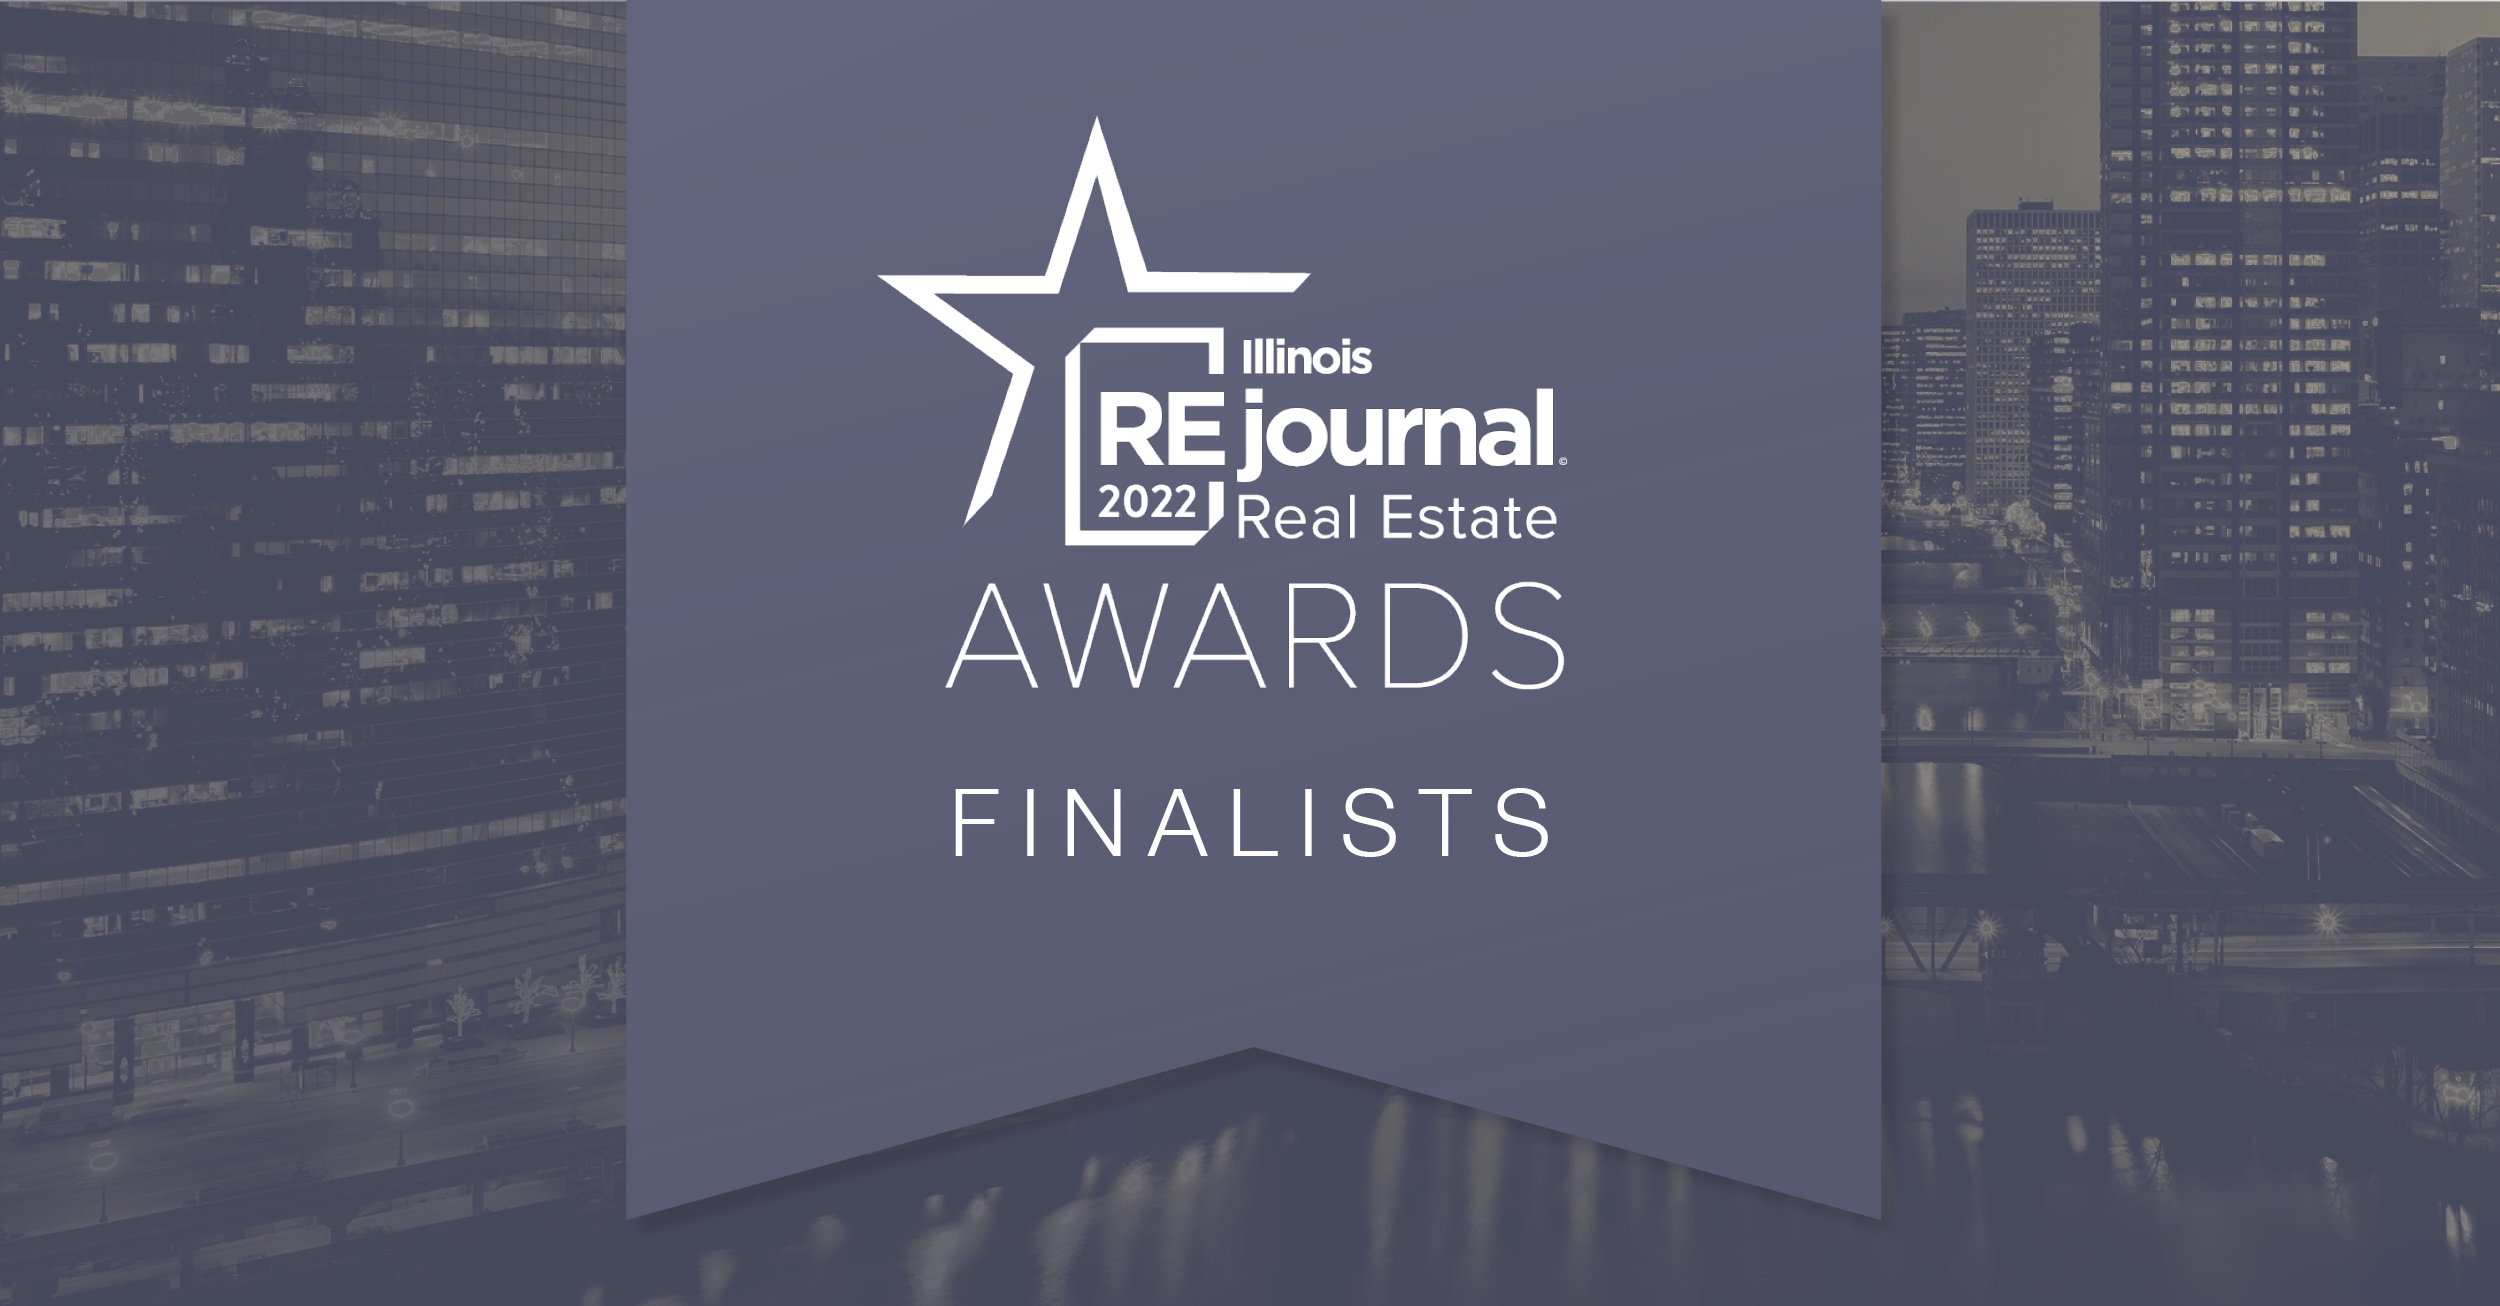 Luxury Living Chicago Realty Earns Finalist Spots in Multiple Categories and Takes Home Executive of the Year at Illinois REjournals Real Estate Awards